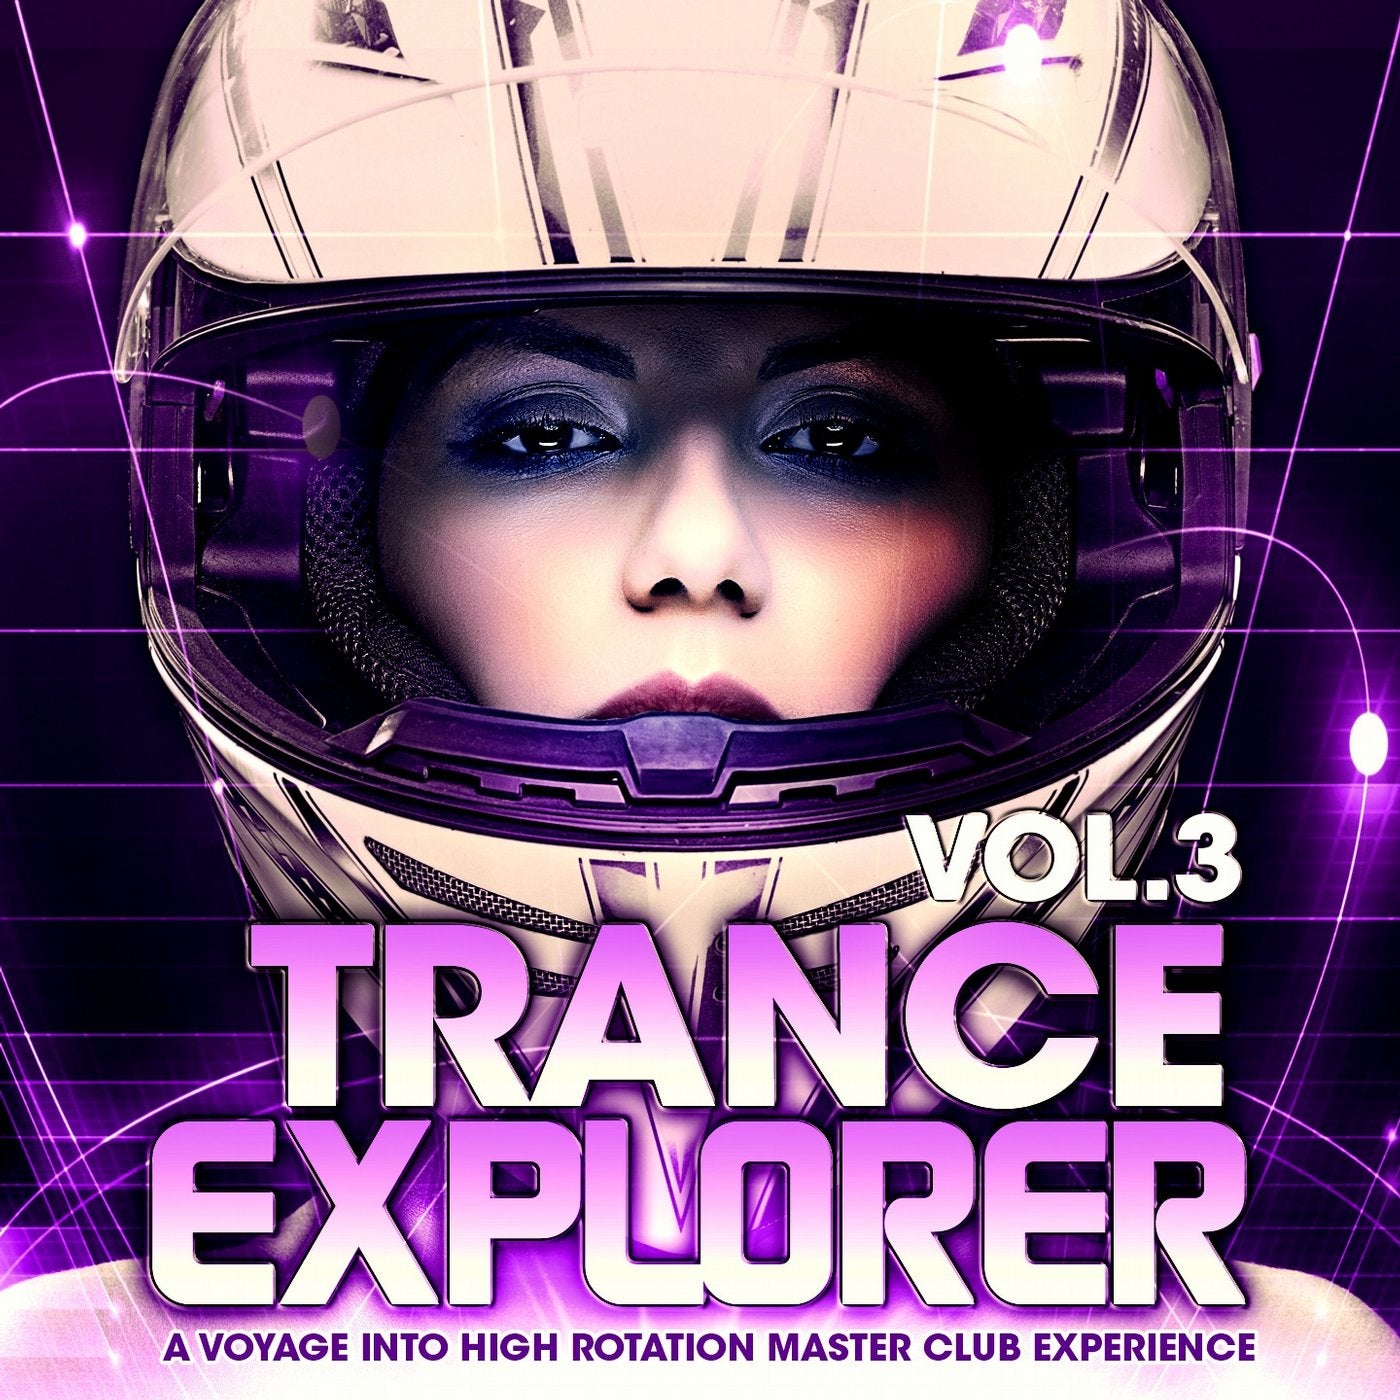 Trance Explorer, Vol.3 (A Voyage into High Rotation Master Club Experience)